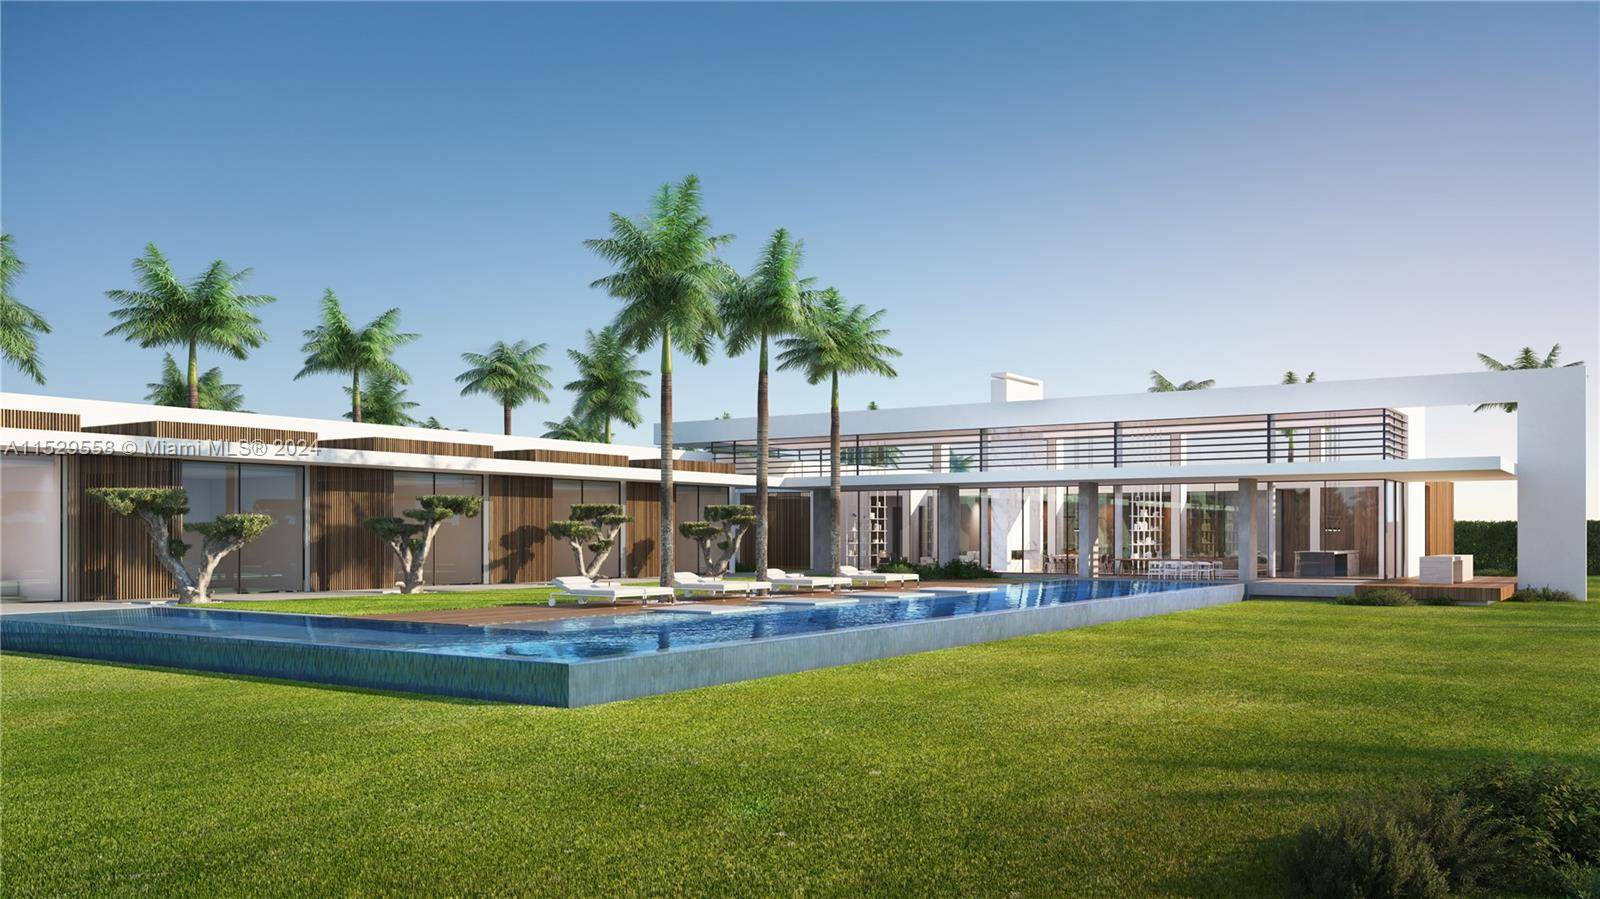 An exquisite contemporary villa, Estate C is situated within the ultra luxurious gated community of AKAI Estates.